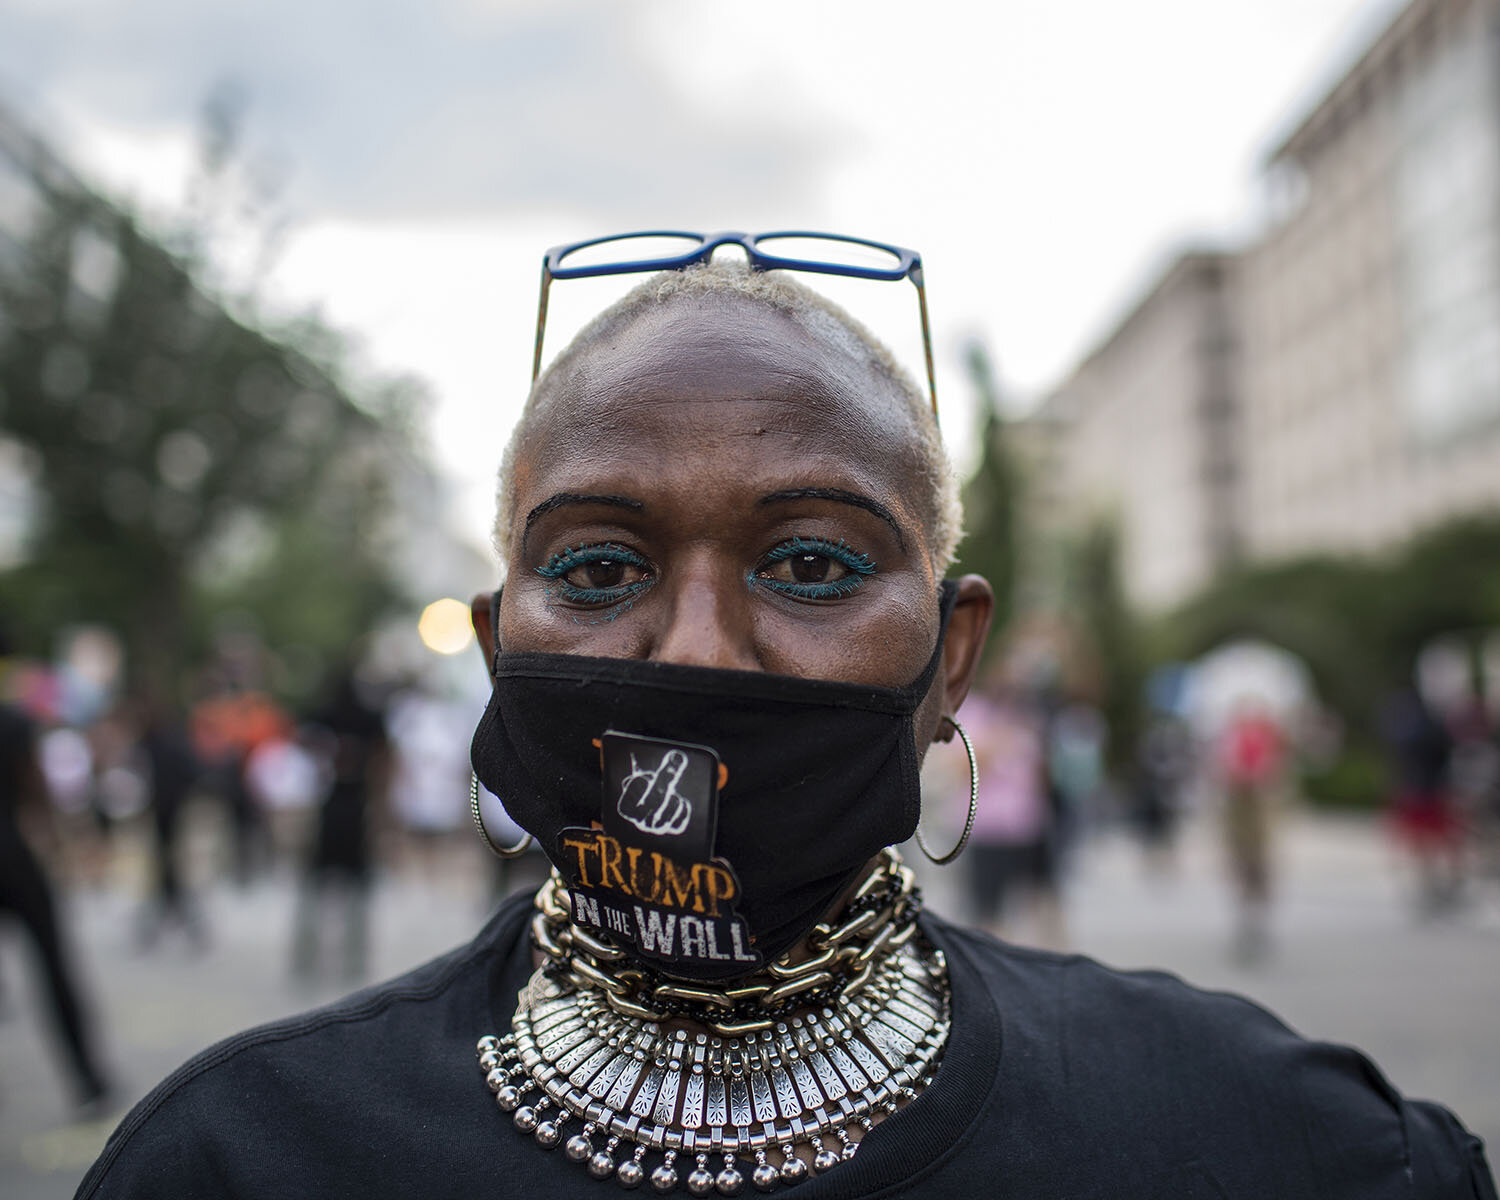  Name:  Nadine Seiler   Age: 55  Occupation: Operator - Freelance/On Demand Mover/Organizer  Date and Place the photo was taken: June 19, 2020, Black Lives Matter Plaza, Washington DC, U.S.A.   Her Statement:  "I am part of BLM protests because as a 